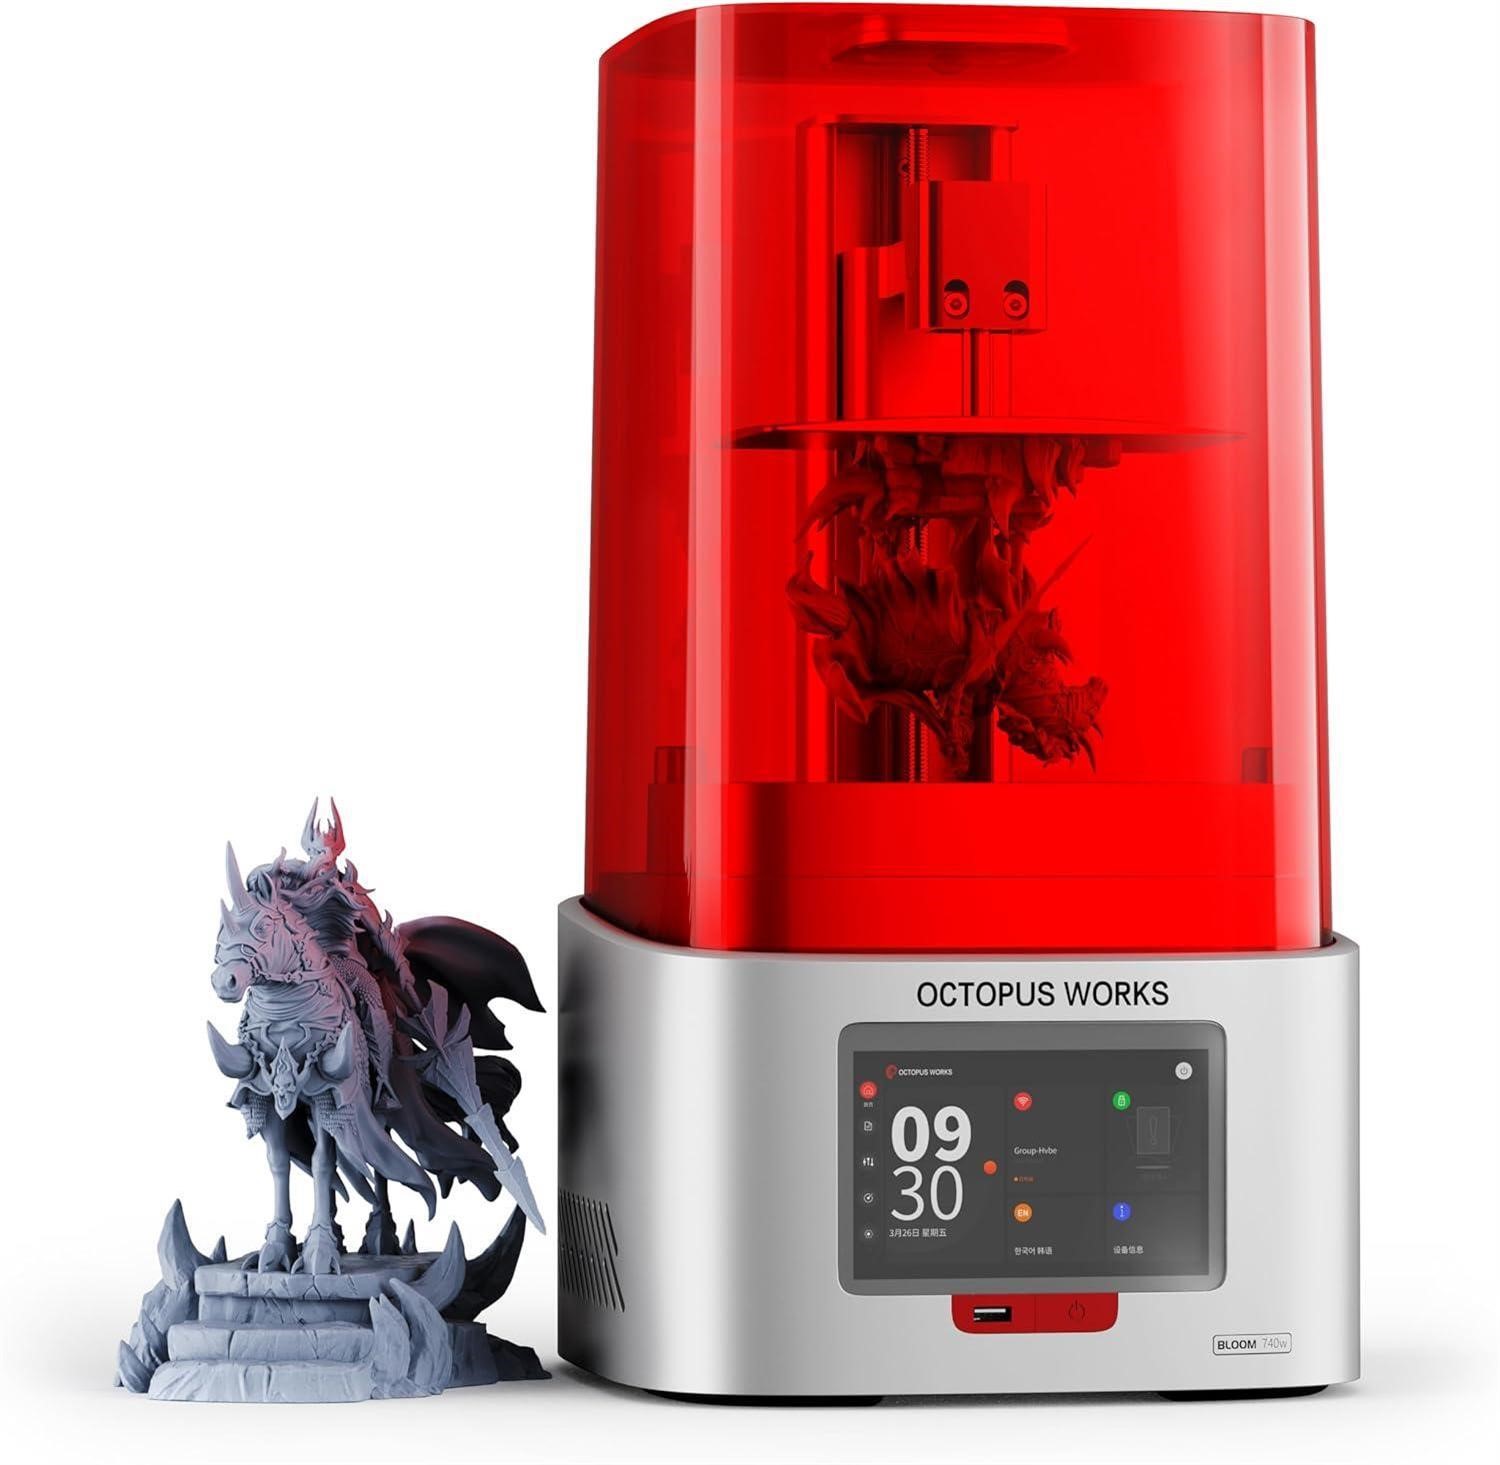 USED-4K Resin 3D Printer with WiFi